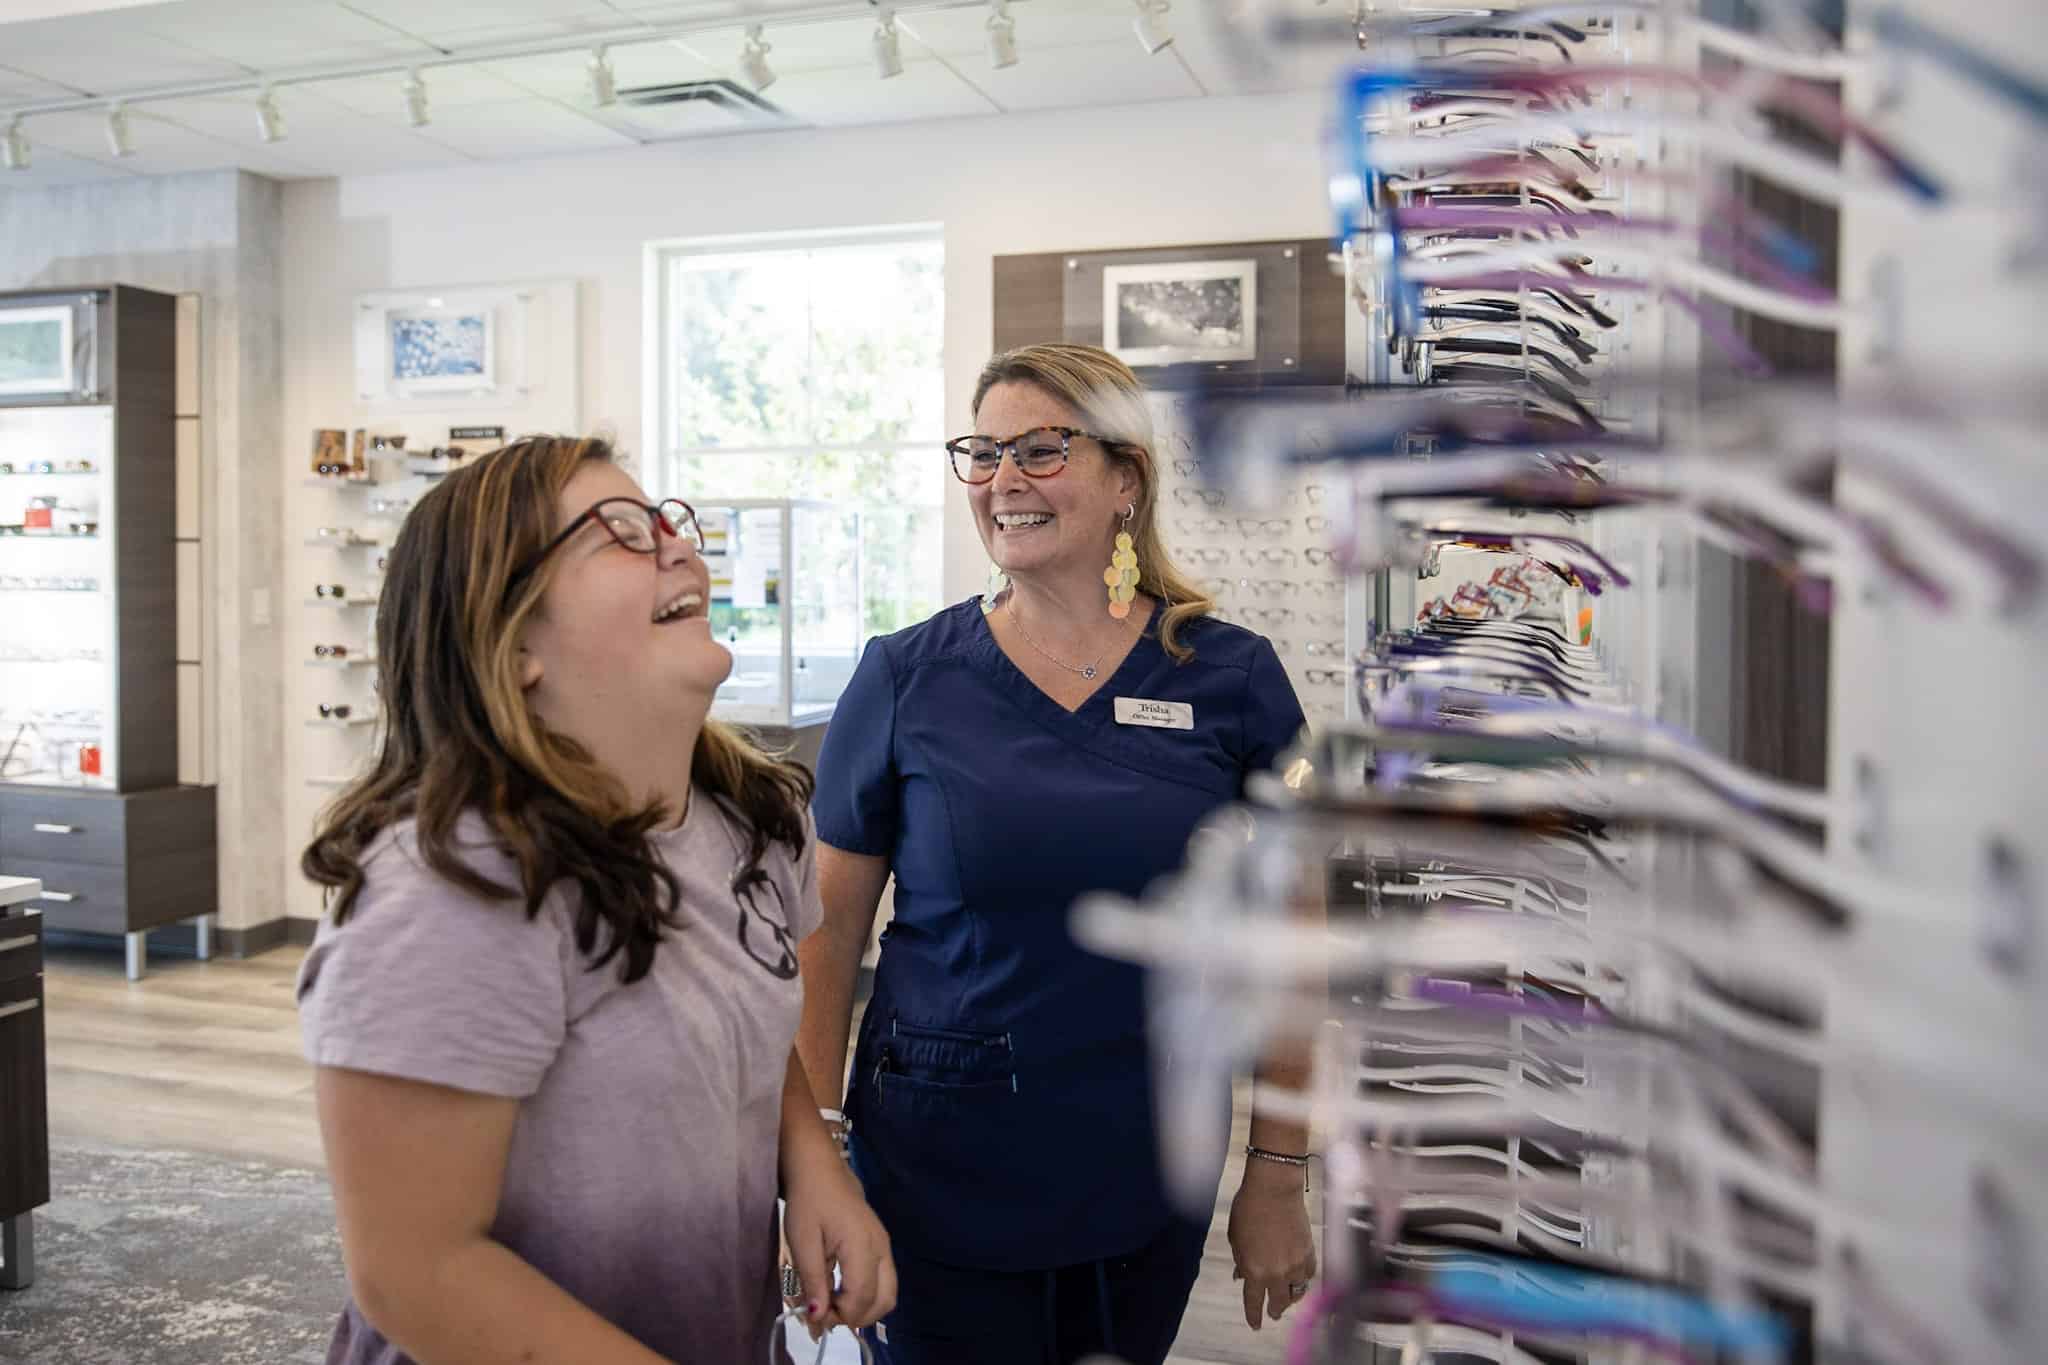 Family Eye Care Office Manager laughing with young female customer while browsing eyeglasses selection in the Bristol office.